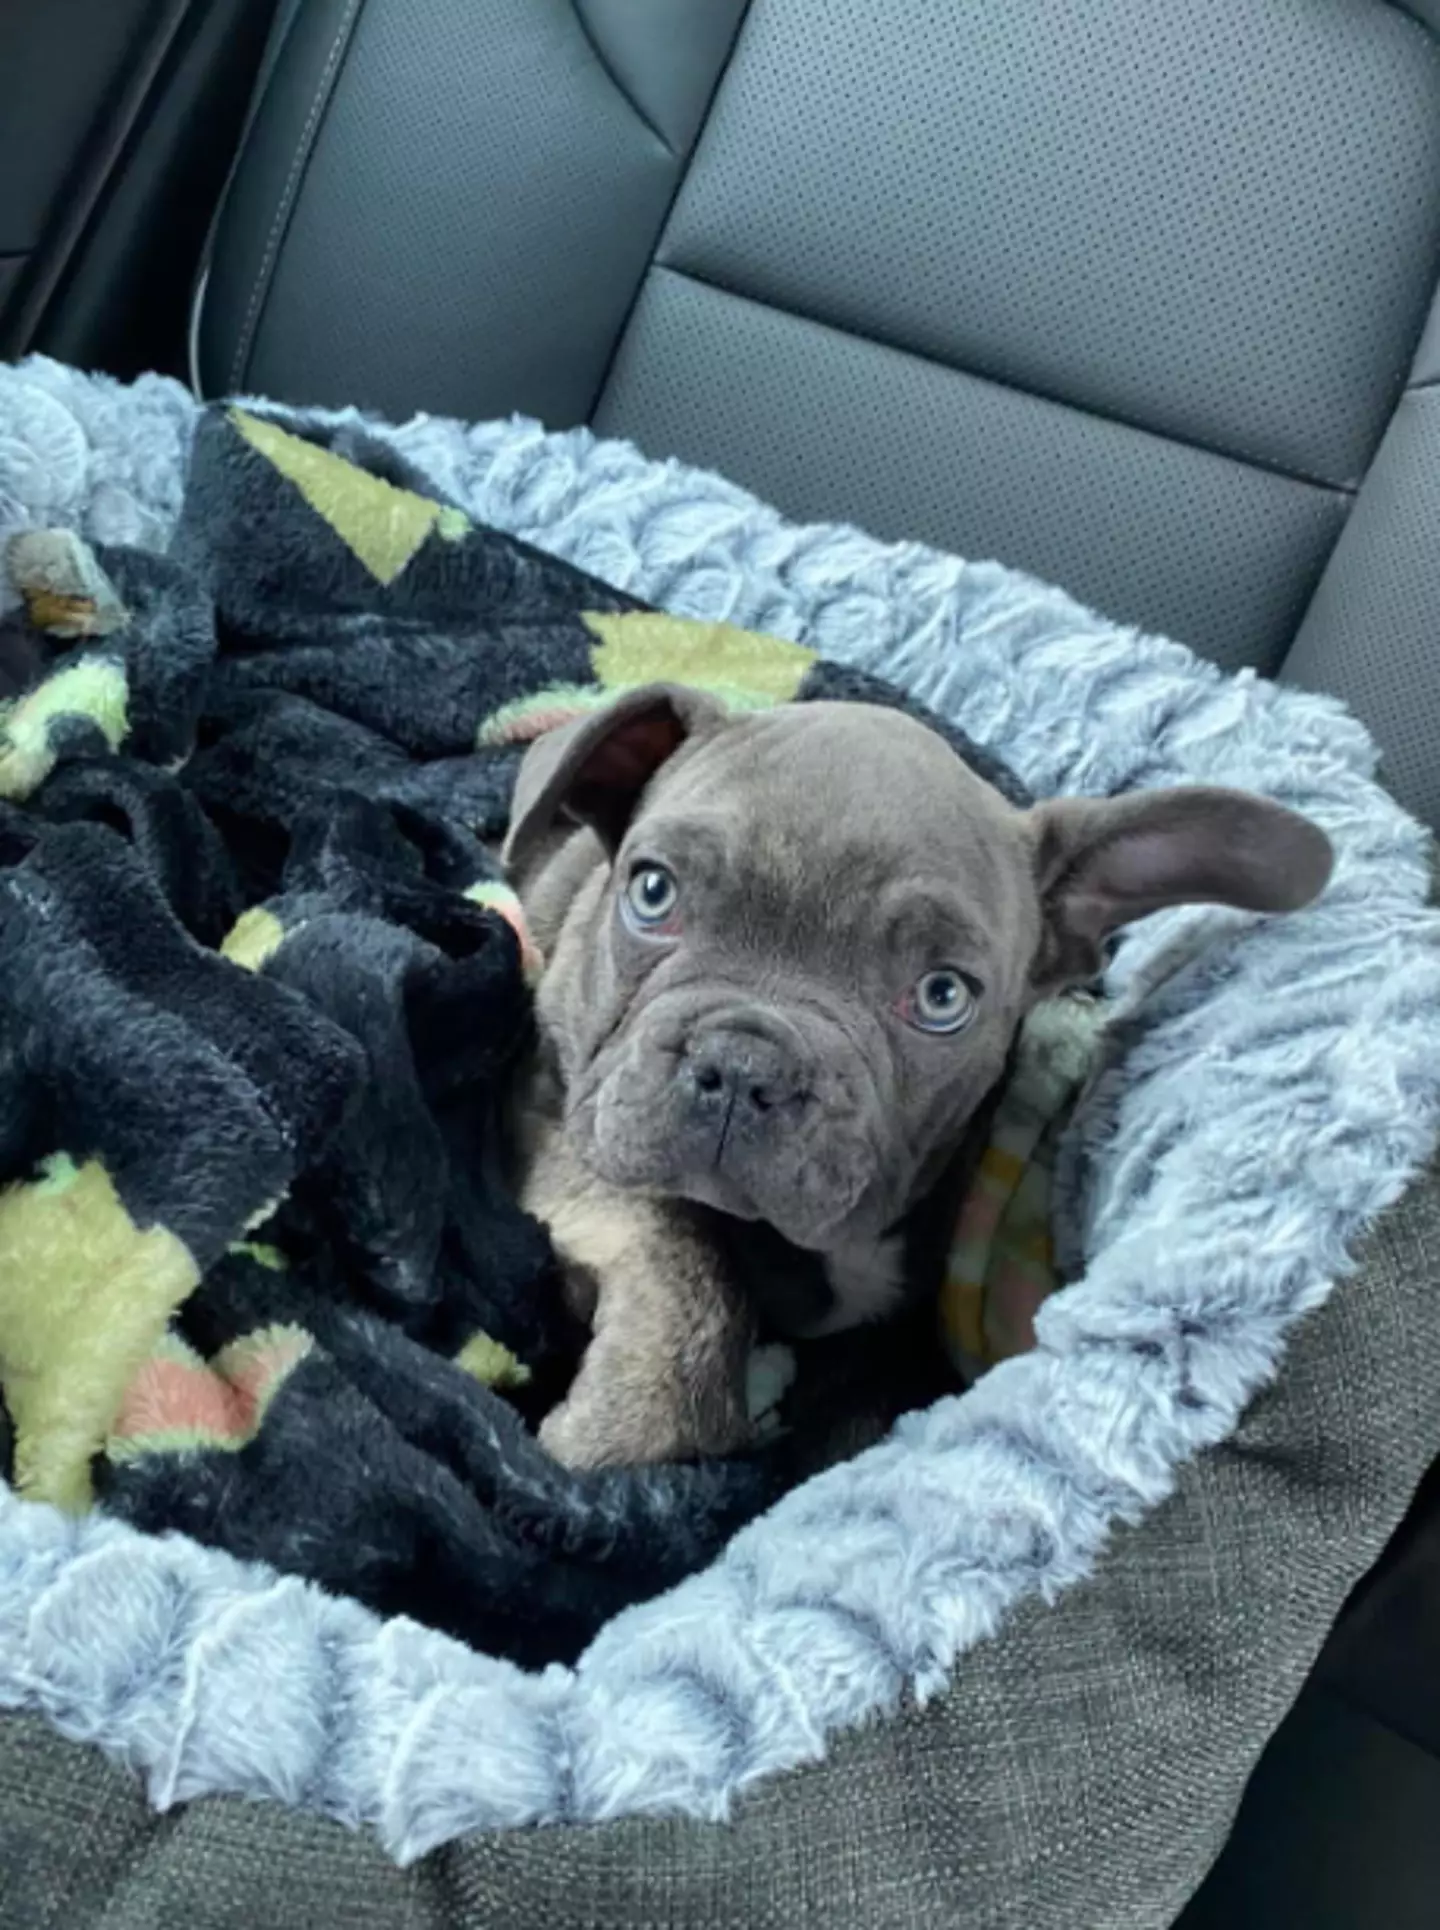 Adam Mclean and Gemma Allan left their two-year-old French Bulldog at a kennel.